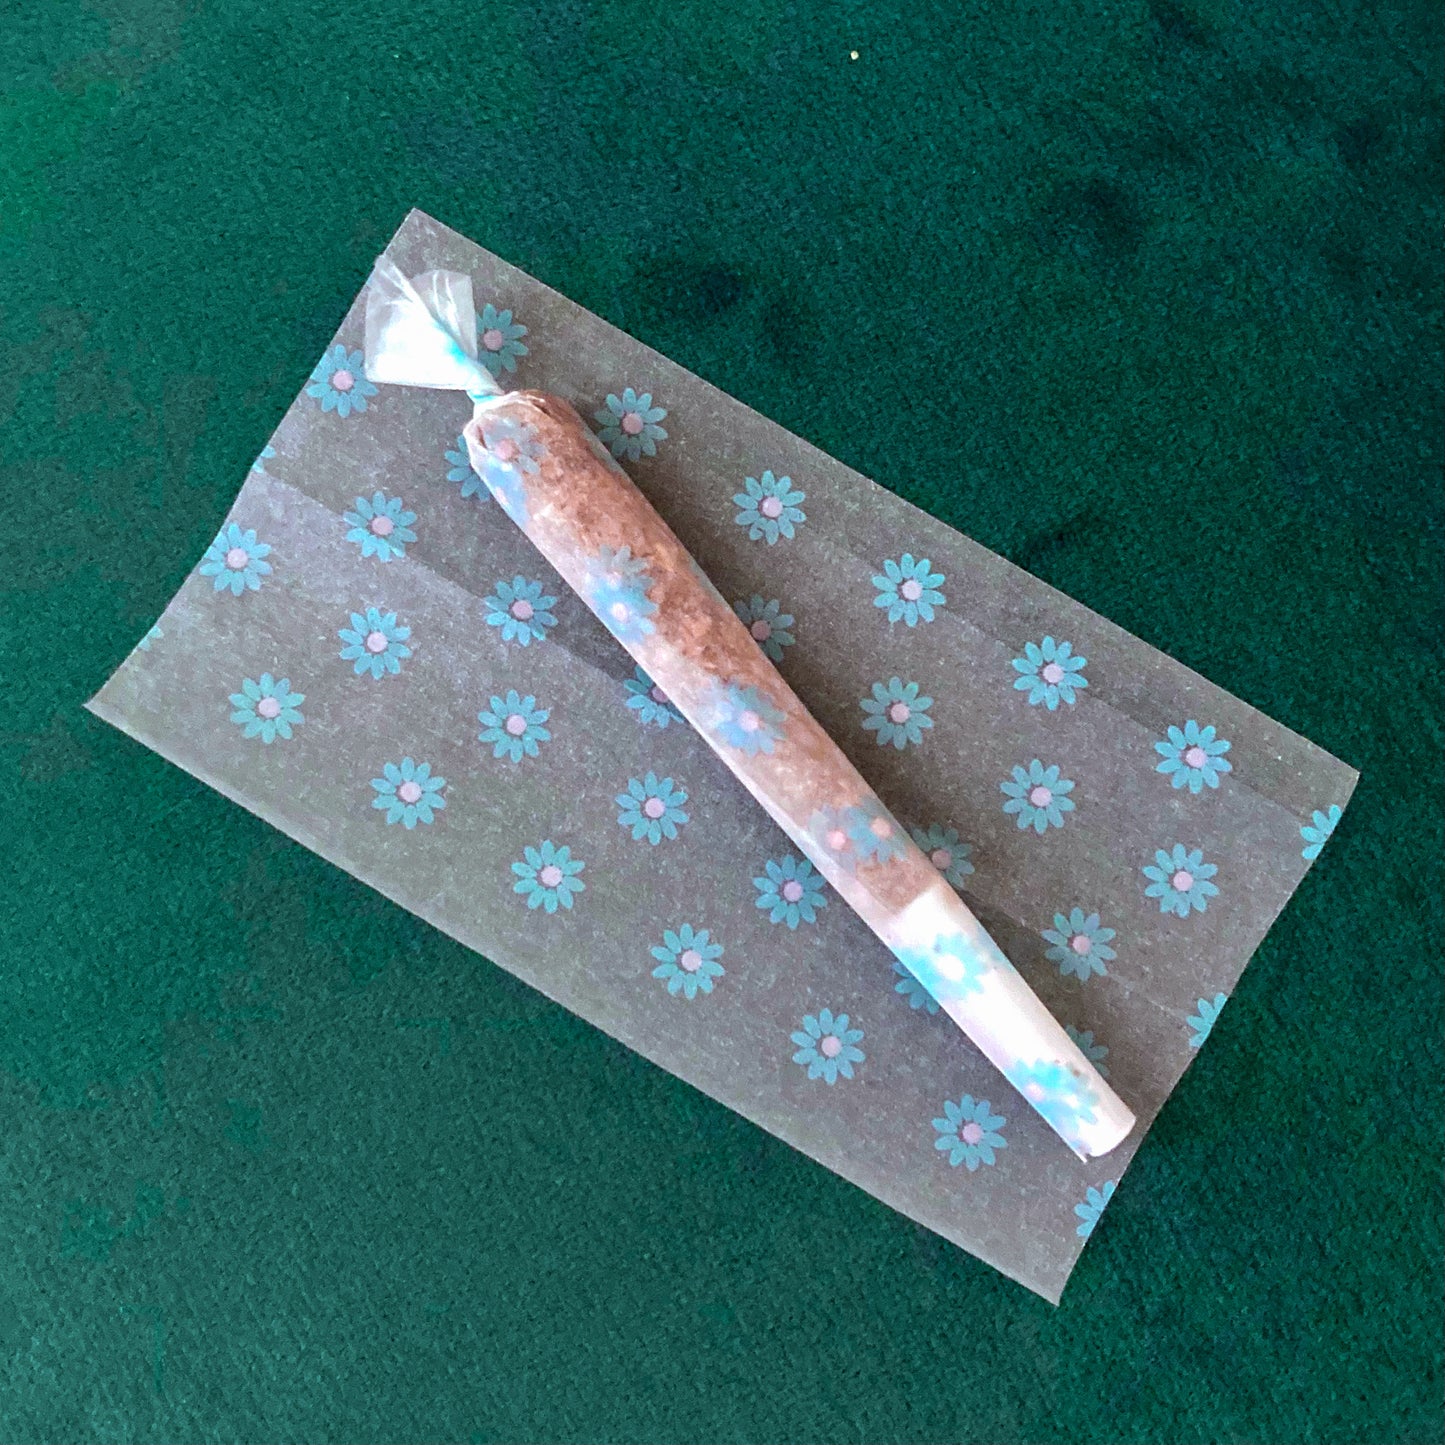 Pollyanna Papers: blue floral papers. These designer rolling papers are girly, pretty, vegan, cute, cool, standard size, high quality, even burn, natural dyes, best tasting, slow burn.